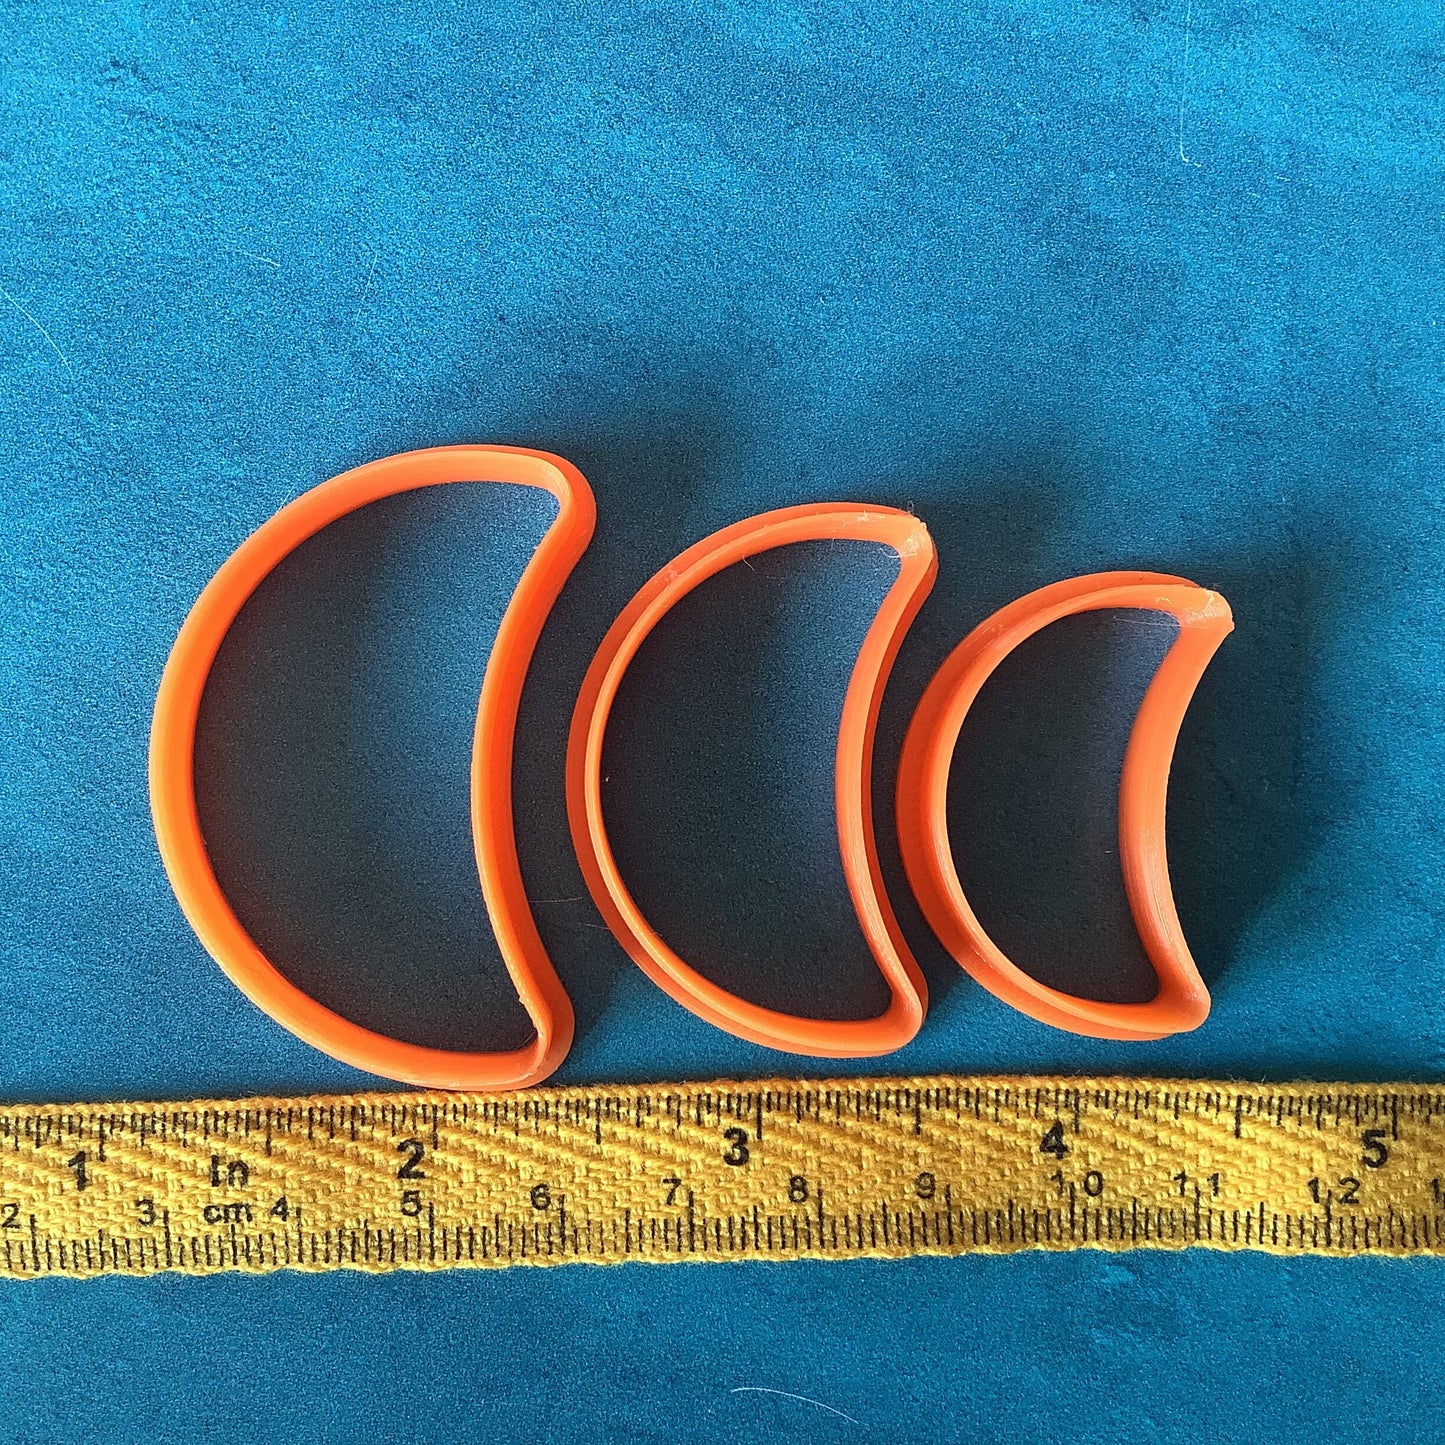 Jelly Bean Moon Jewelry Sized set of 3 Cutters for Polymer Clay and Mixed Media DIY